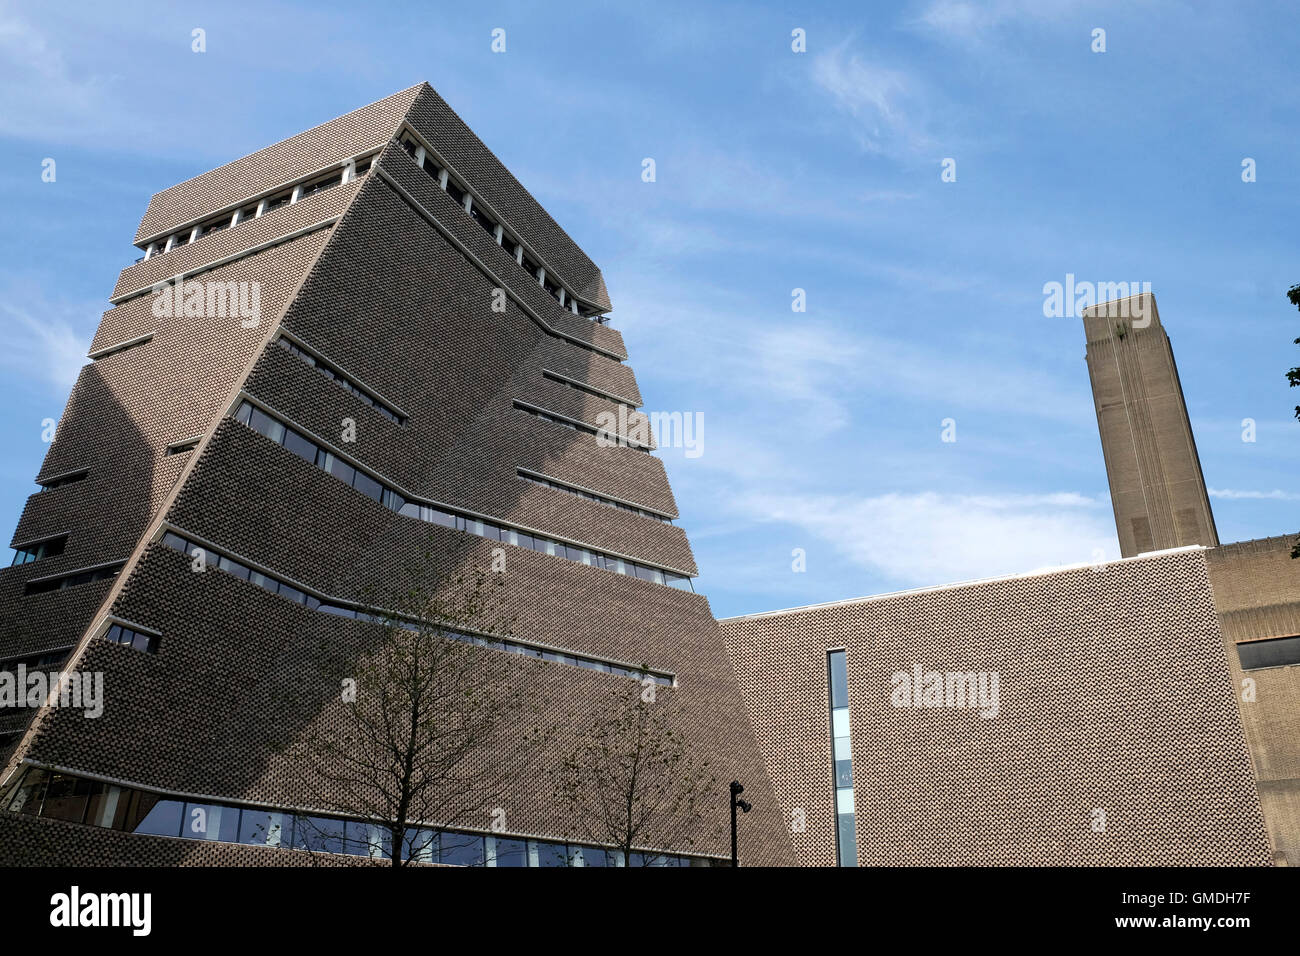 A general view of the Switch house, the building at the Tate Modern in London Stock Photo